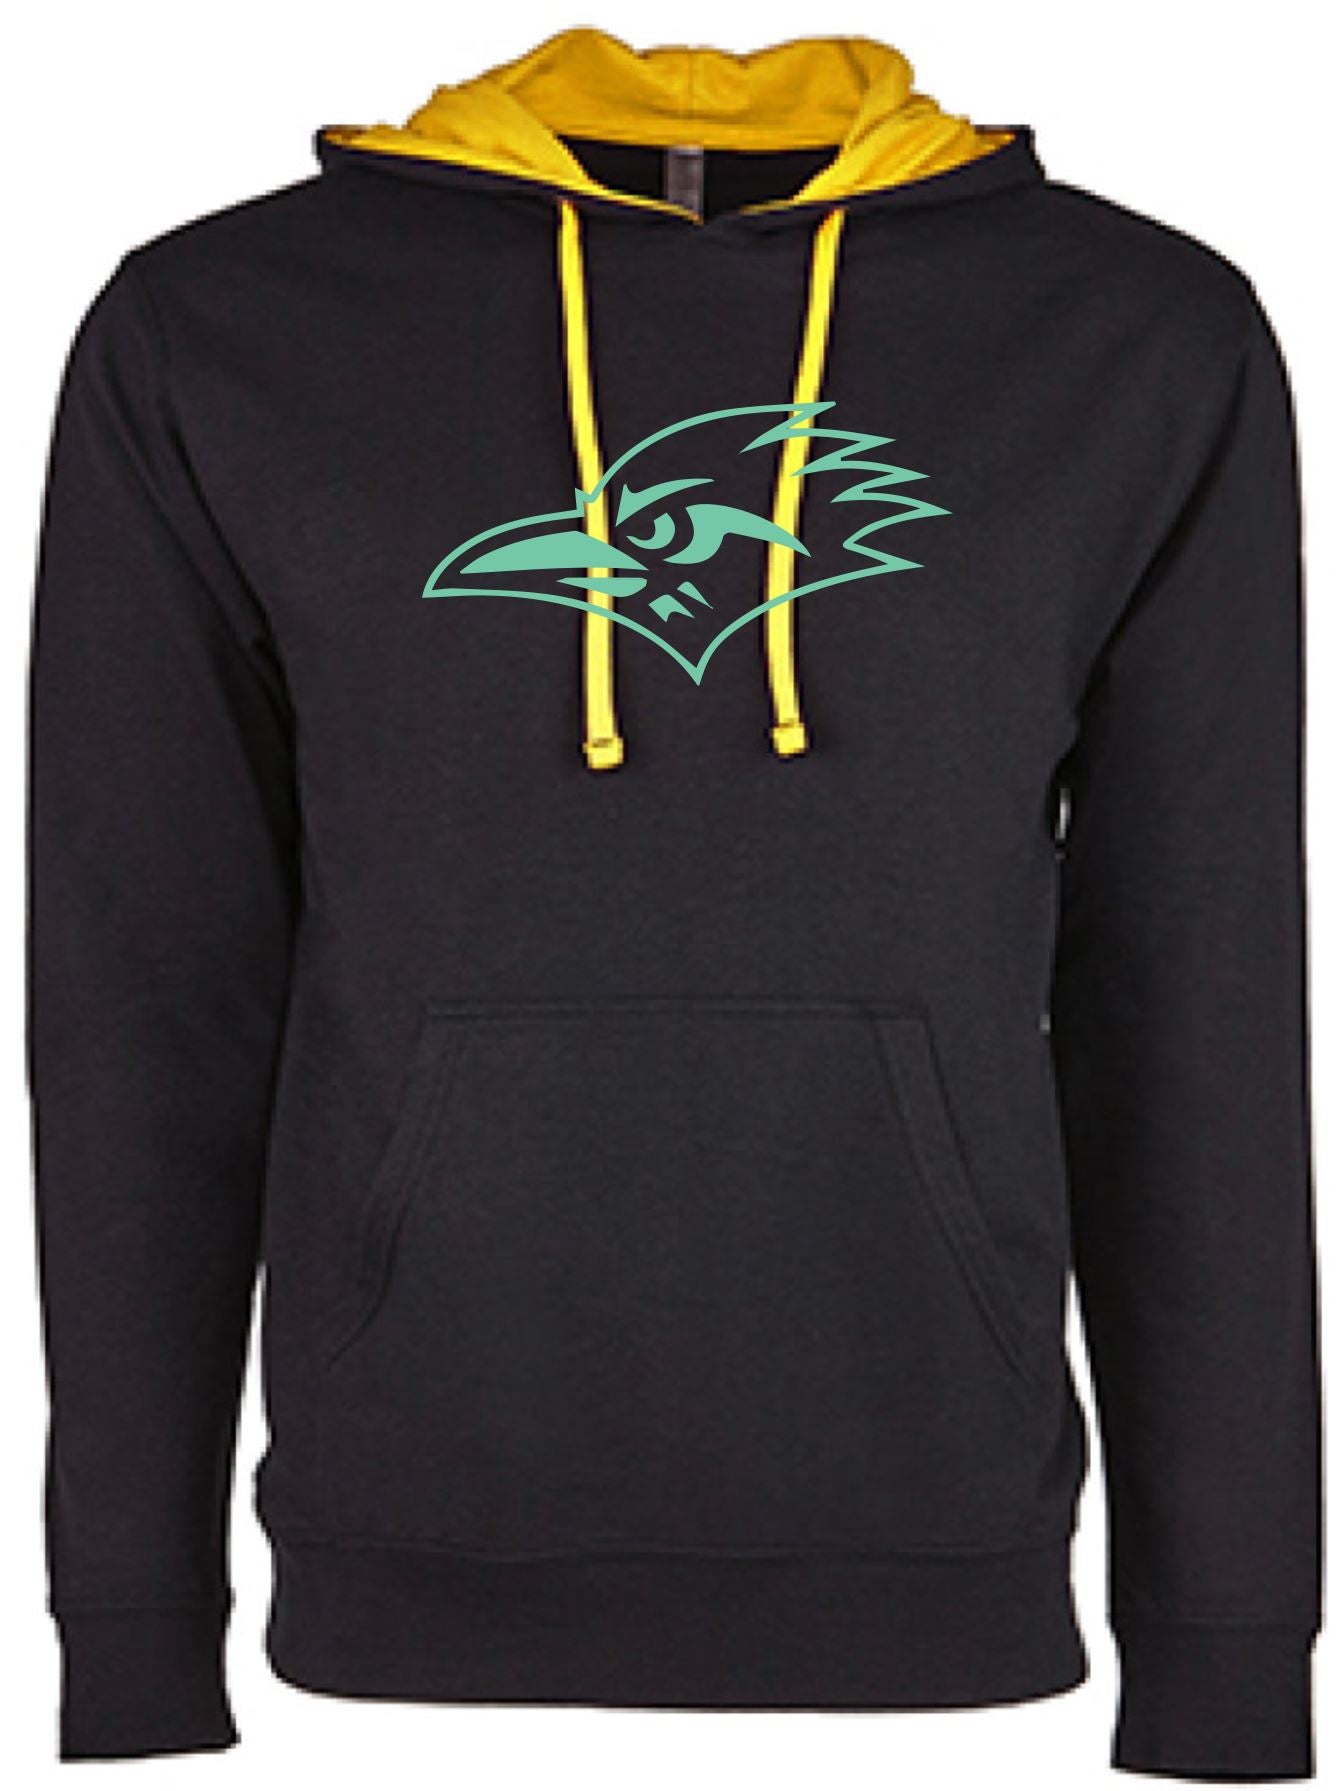 STSC designs Next Level Apparel French Terry Pullover Hoodie